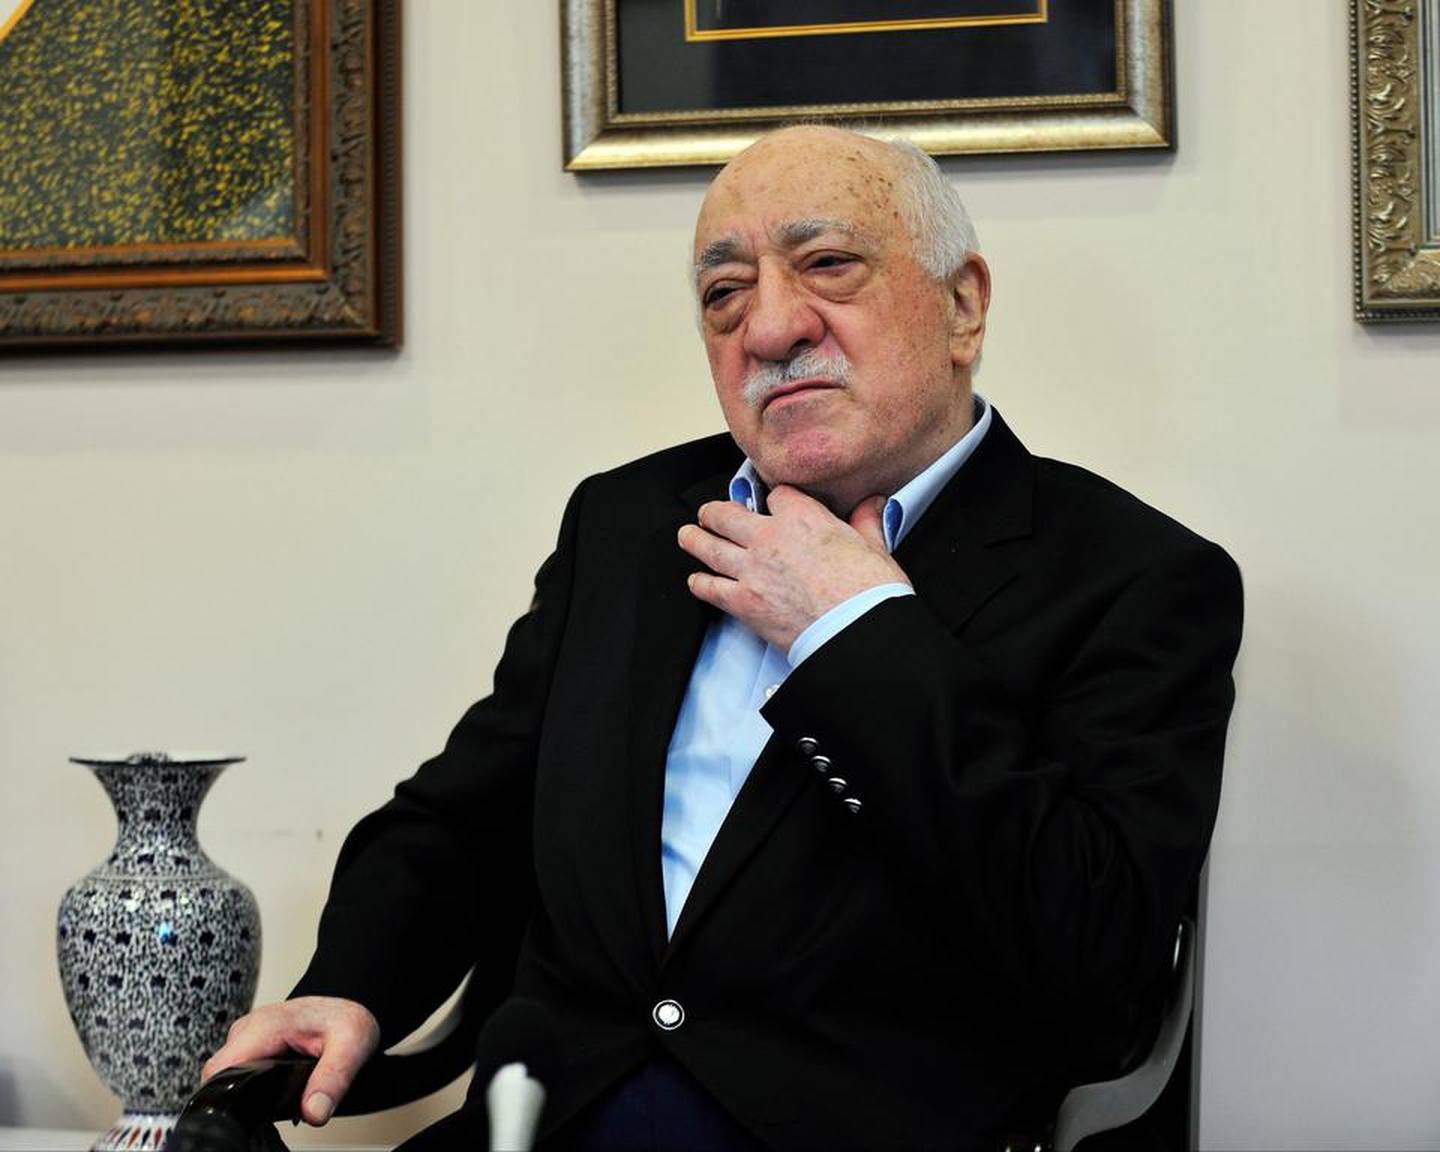 Turkey’s self-exiled Islamic cleric Fethullah Gulen is blamed by President Recep Tayyip Erdogan for the 2016 coup attempt. AP Photo